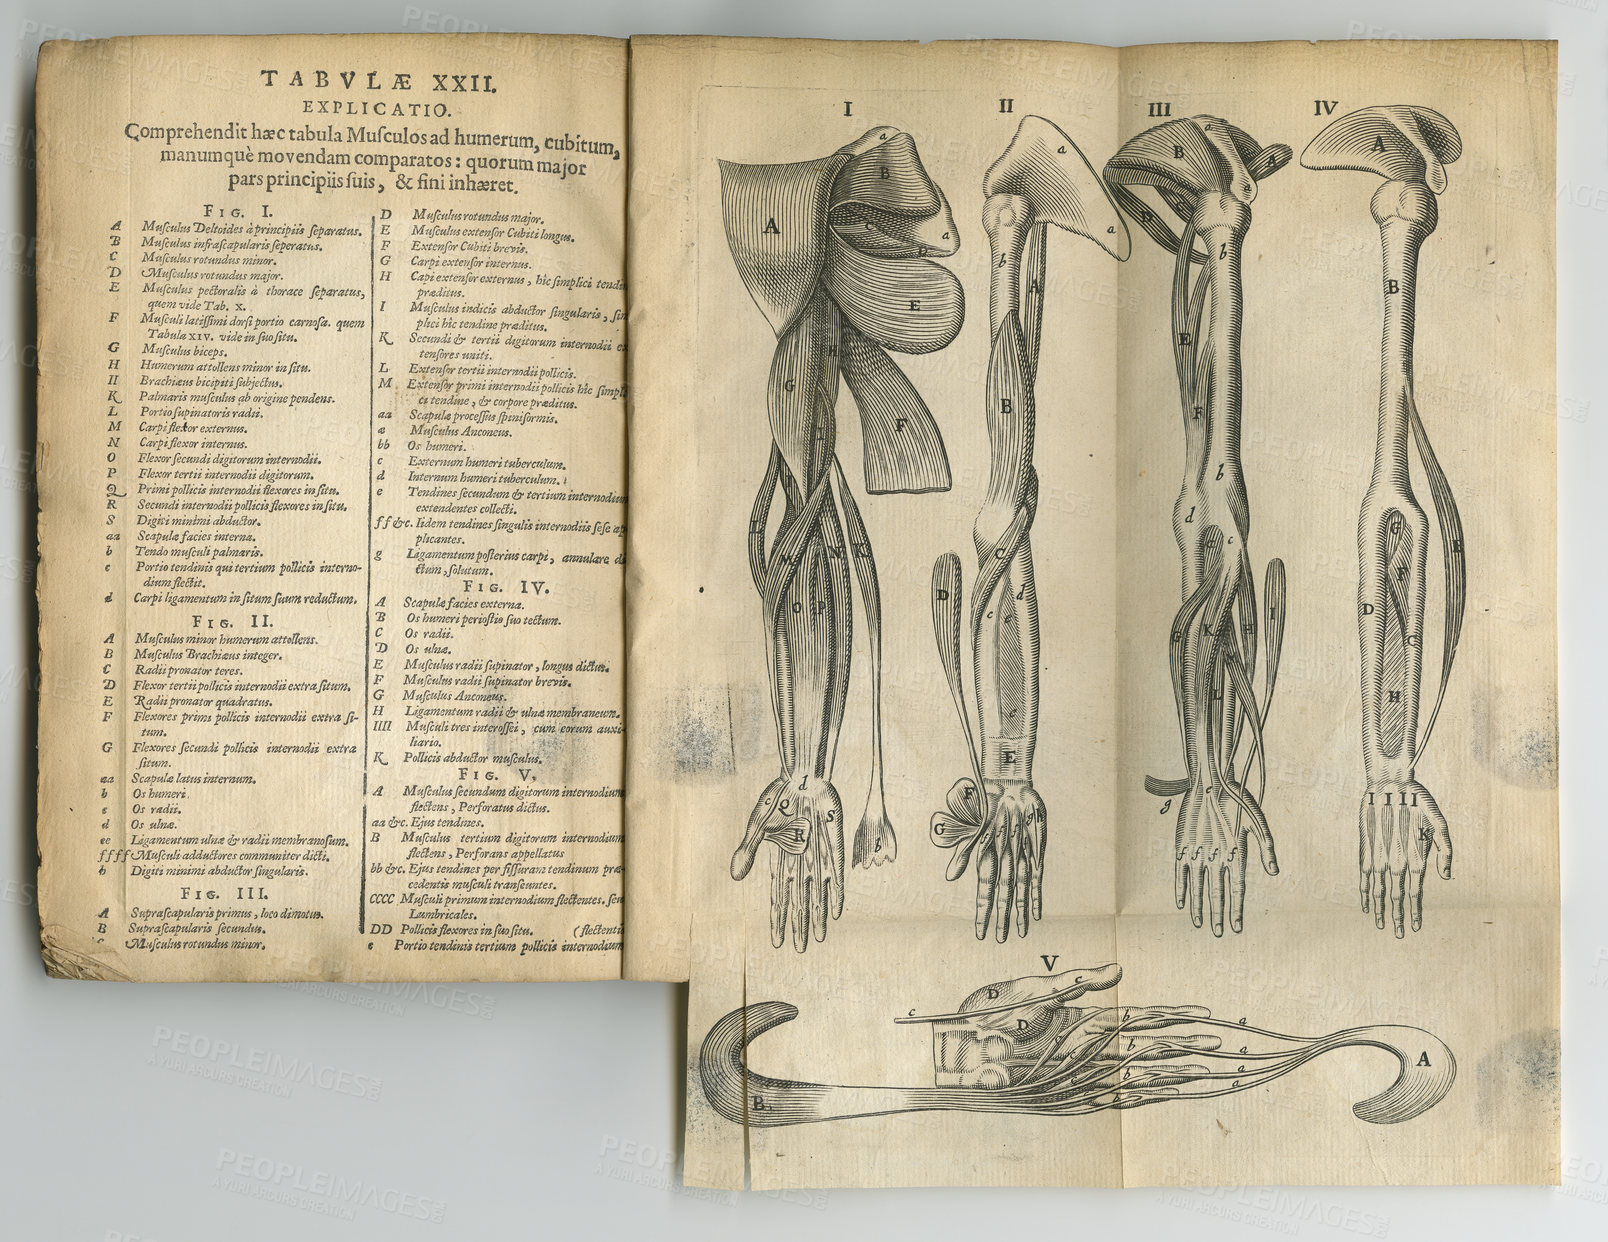 Buy stock photo Antique medical book, ancient and drawing of arm anatomy, skeleton or bones for medicine study research. Latin language, history sketch journal and text manual for healthcare education literature